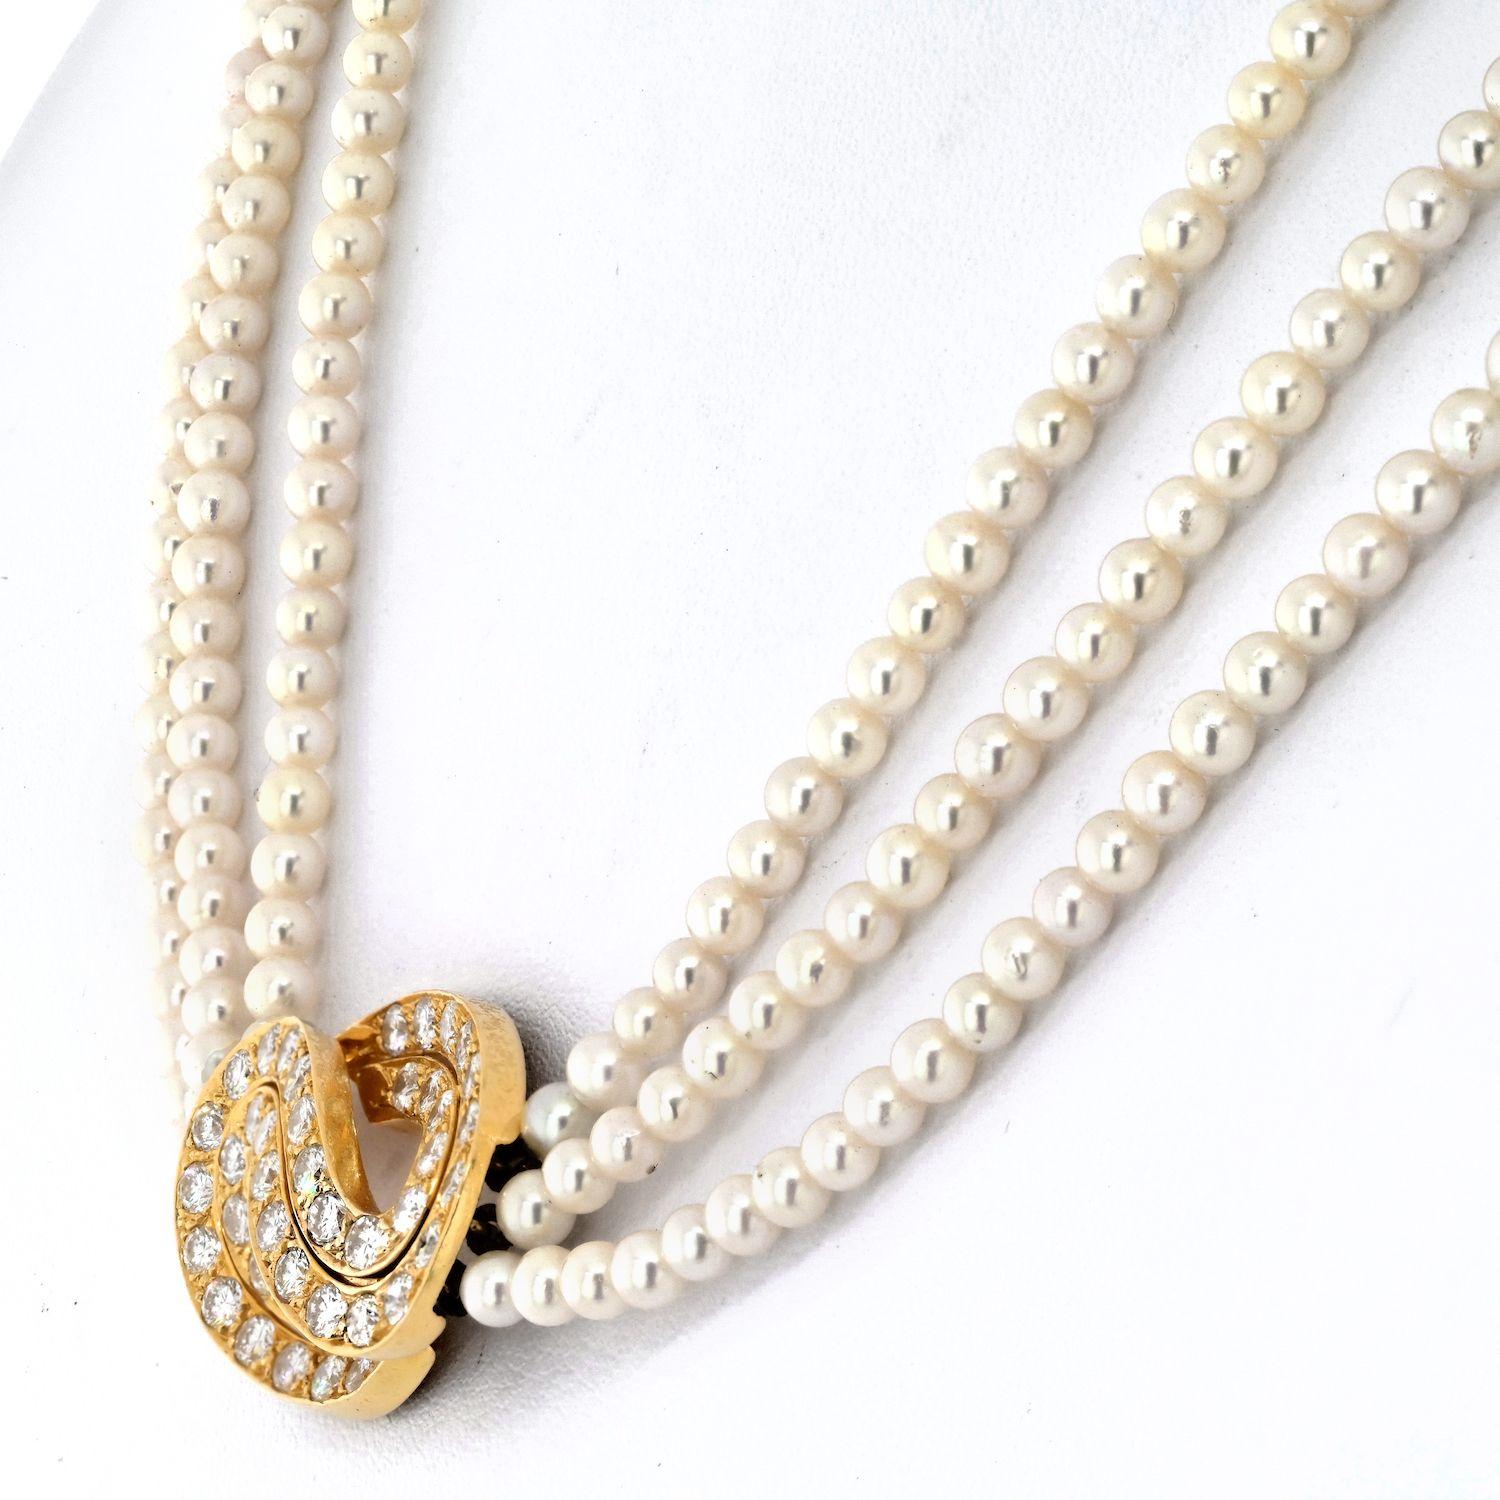 Modern Van Cleef & Arpels 18K Yellow Gold Multistrand Pearl Diamond Necklace For Sale